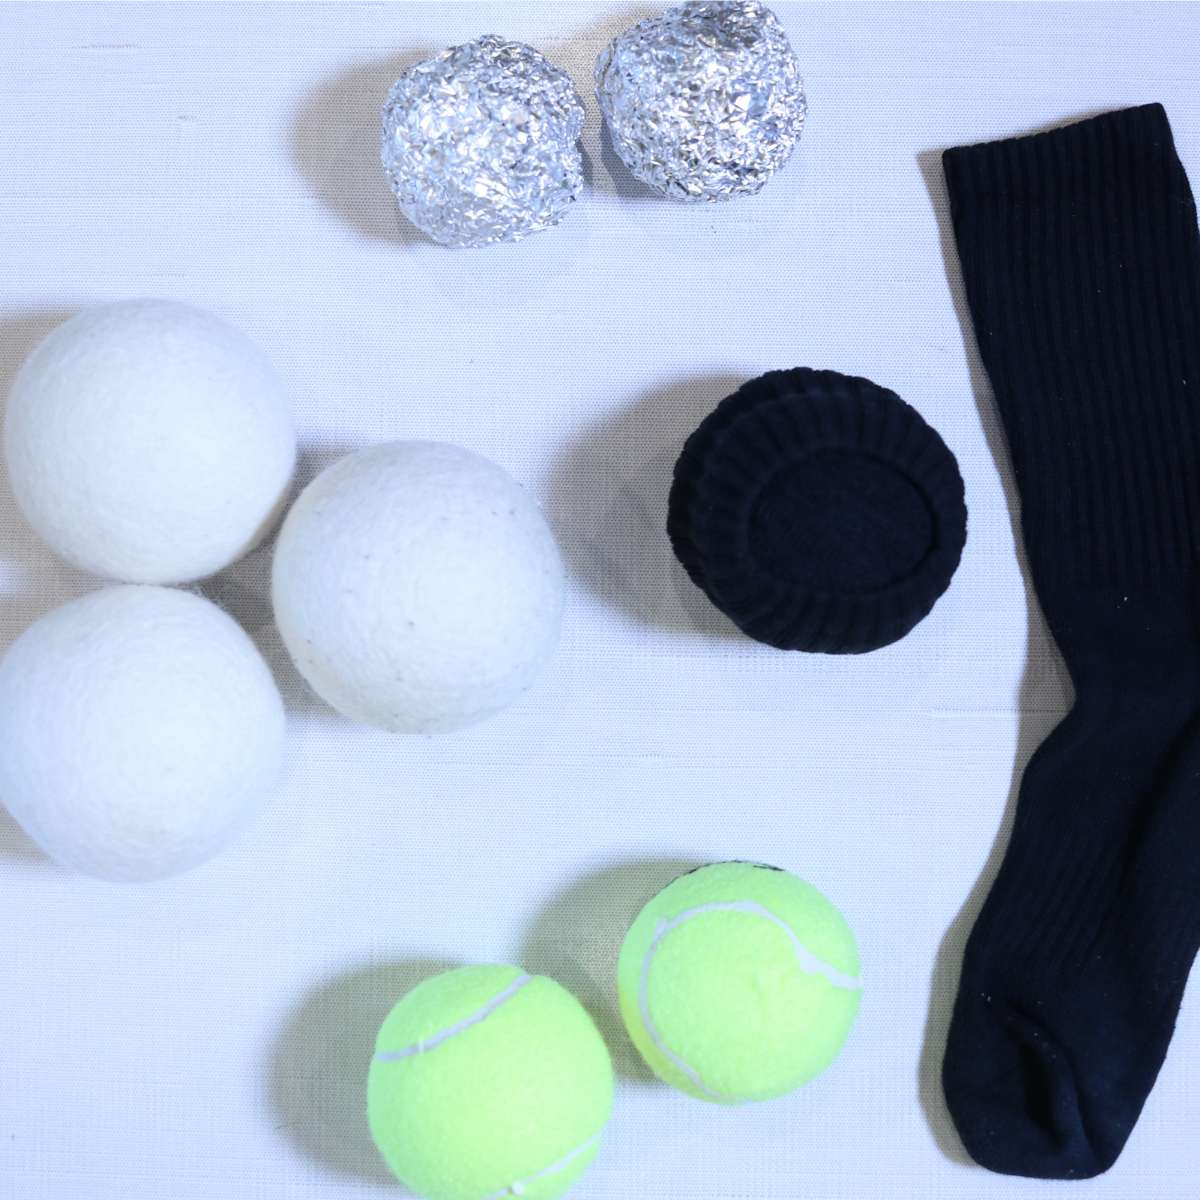 A table top with multiple DIY dryer ball laundry hacks including tennis balls, old socks shaped into a ball and 2 large balls of aluminum foil.